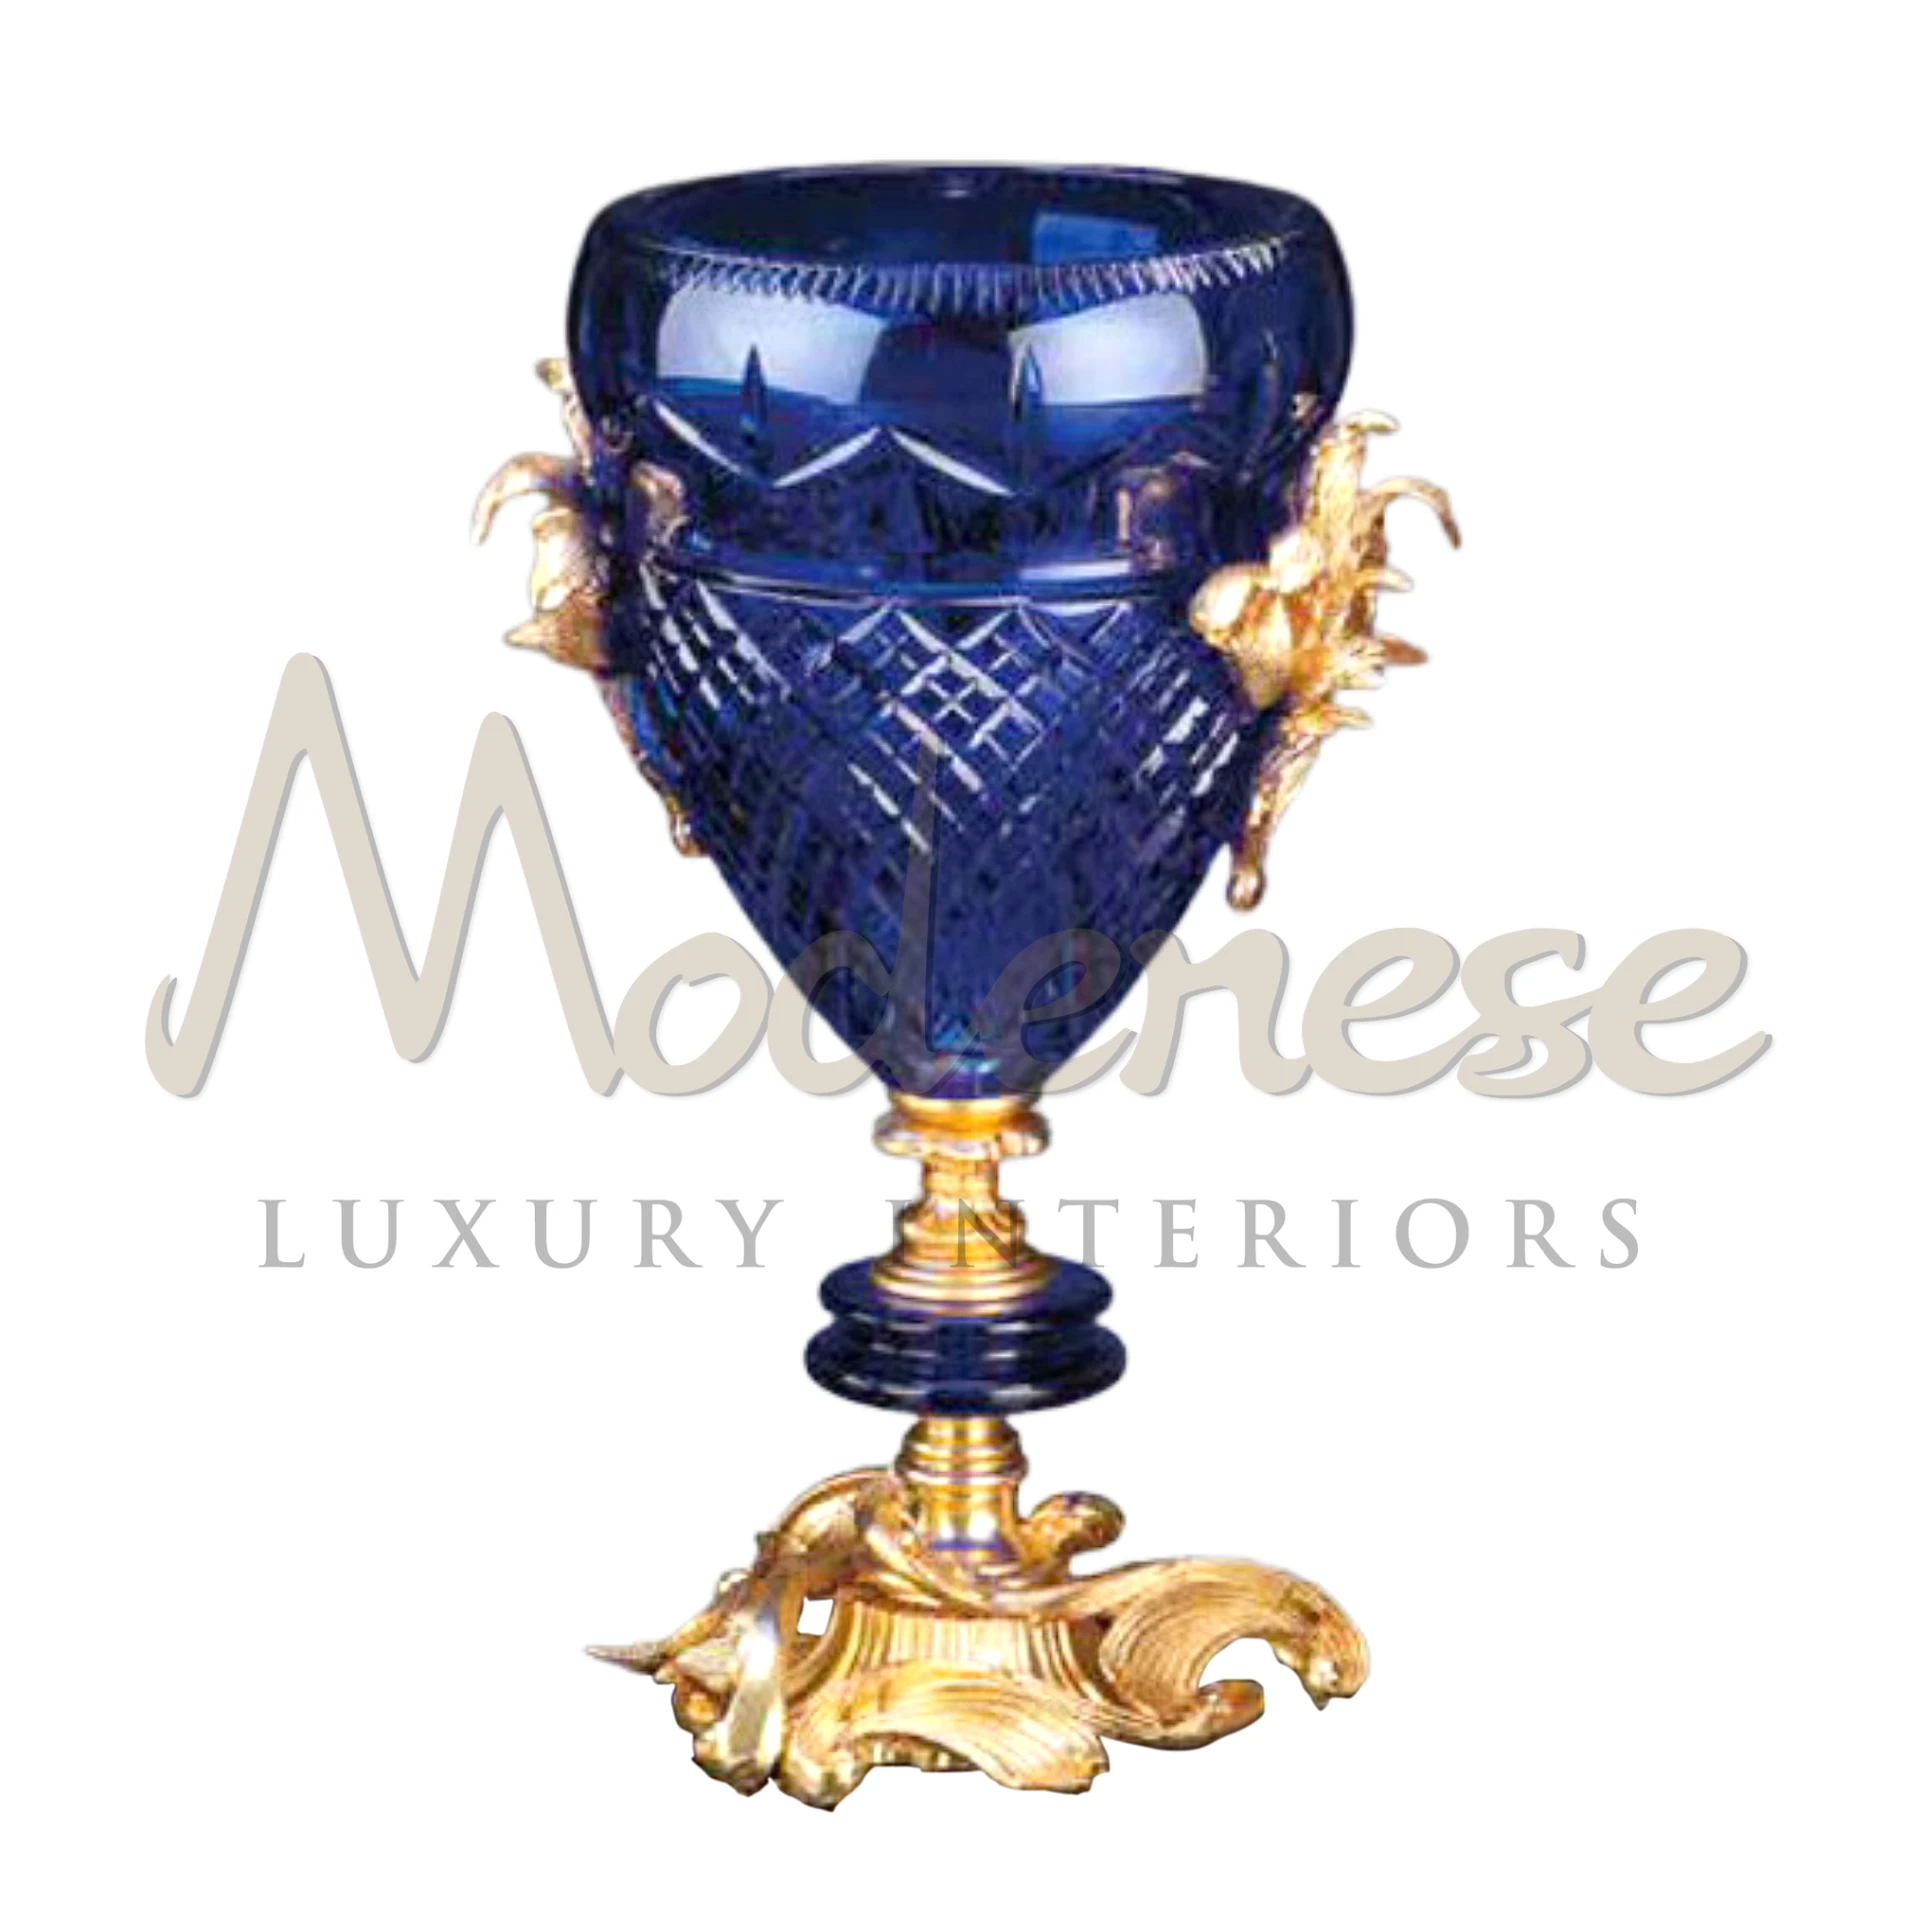 Classical Blue Glass Vase, embodying serene elegance in a timeless design, ideal for adding a tranquil touch to any luxury interior with a traditional or classic style.






